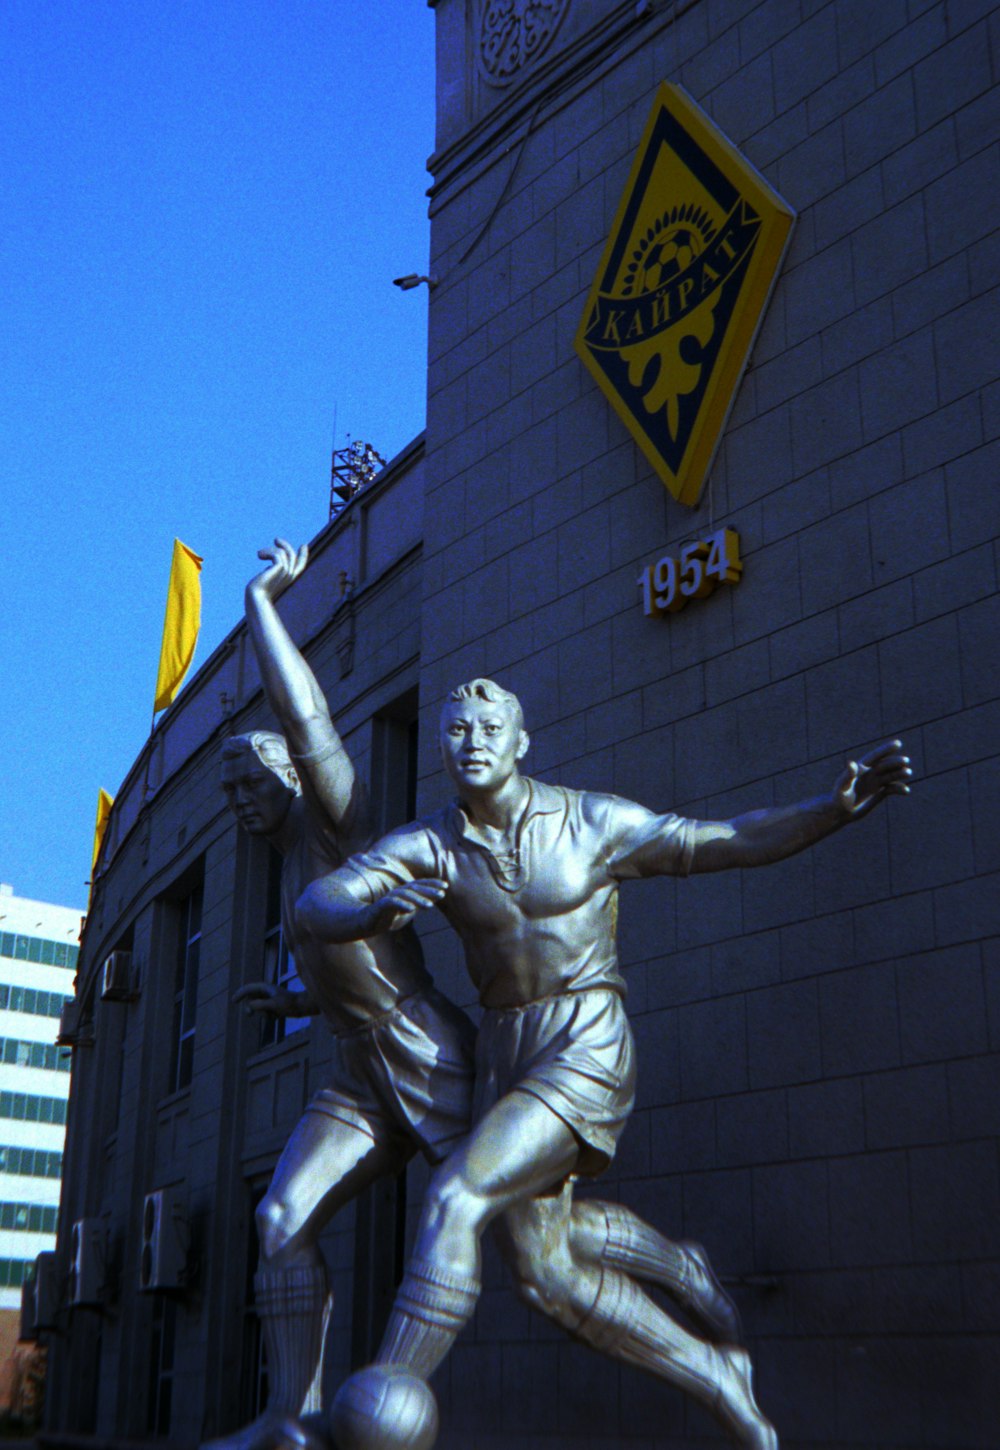 a statue of two men playing a game of frisbee